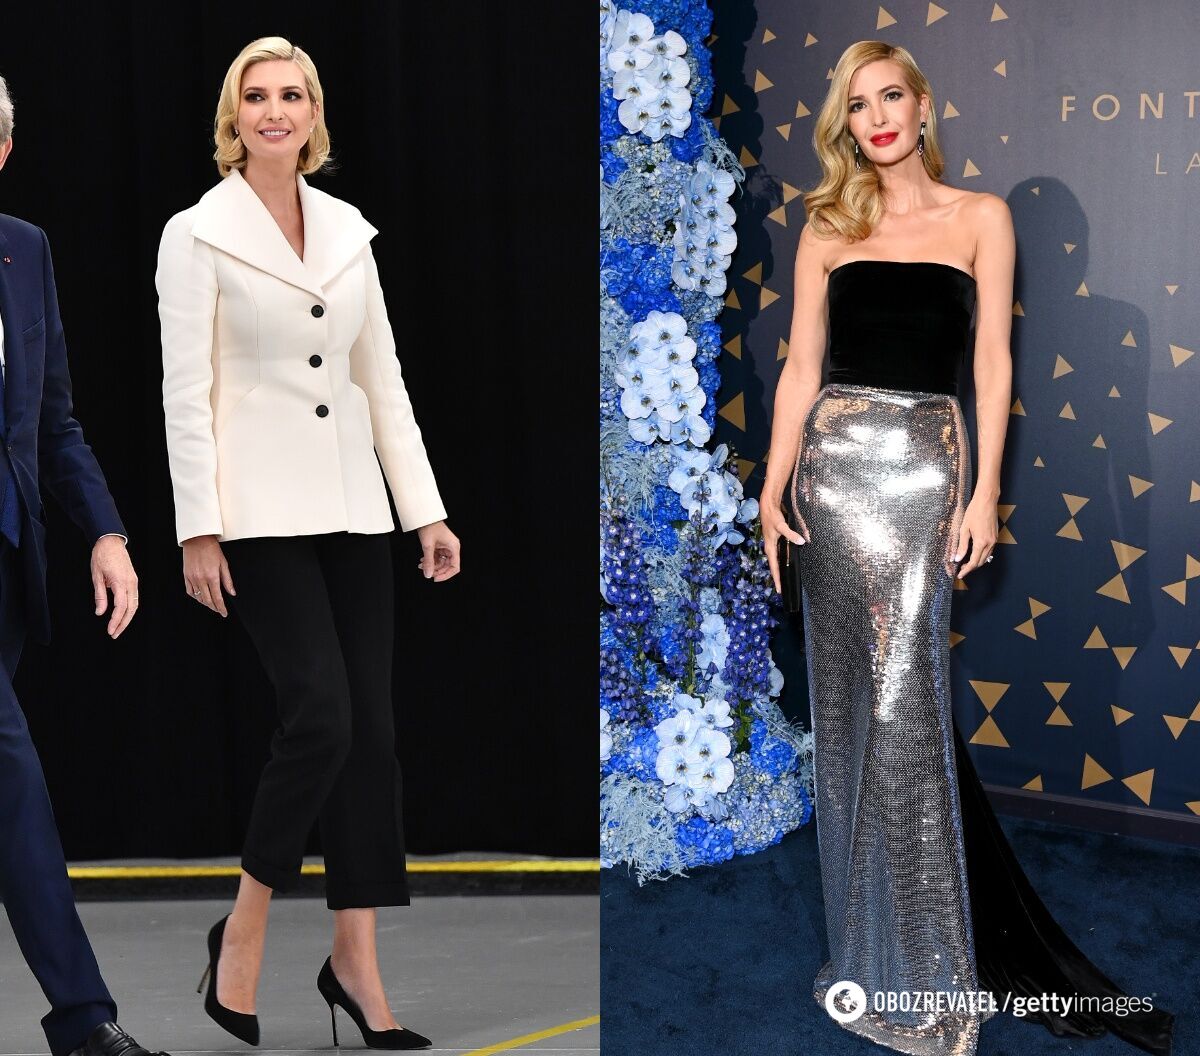 Ivanka Trump, Kinga Duda, and more: how the daughters of presidents look and dress. Photo